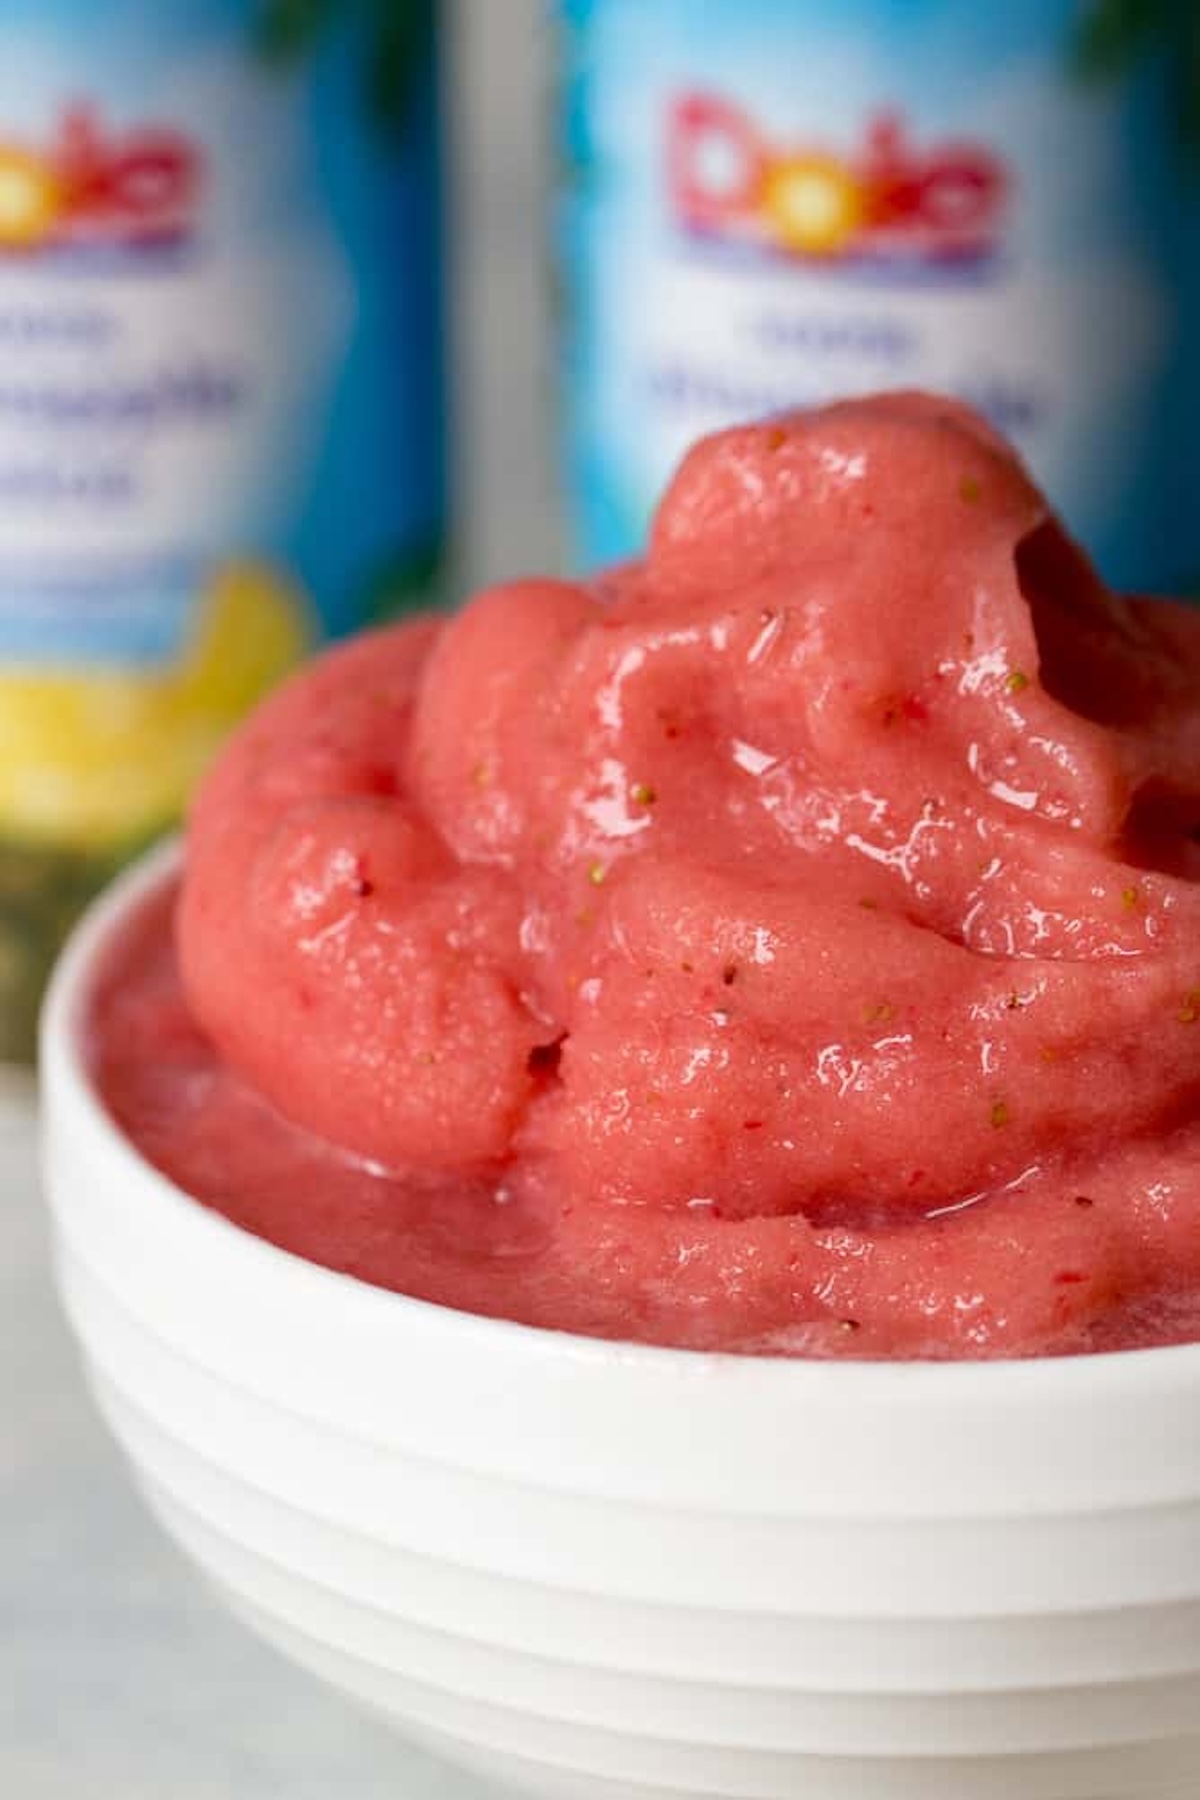 A white bowl filled with smooth, pink strawberry sorbet. In the blurred background, two cans of Dole pineapple juice are visible.